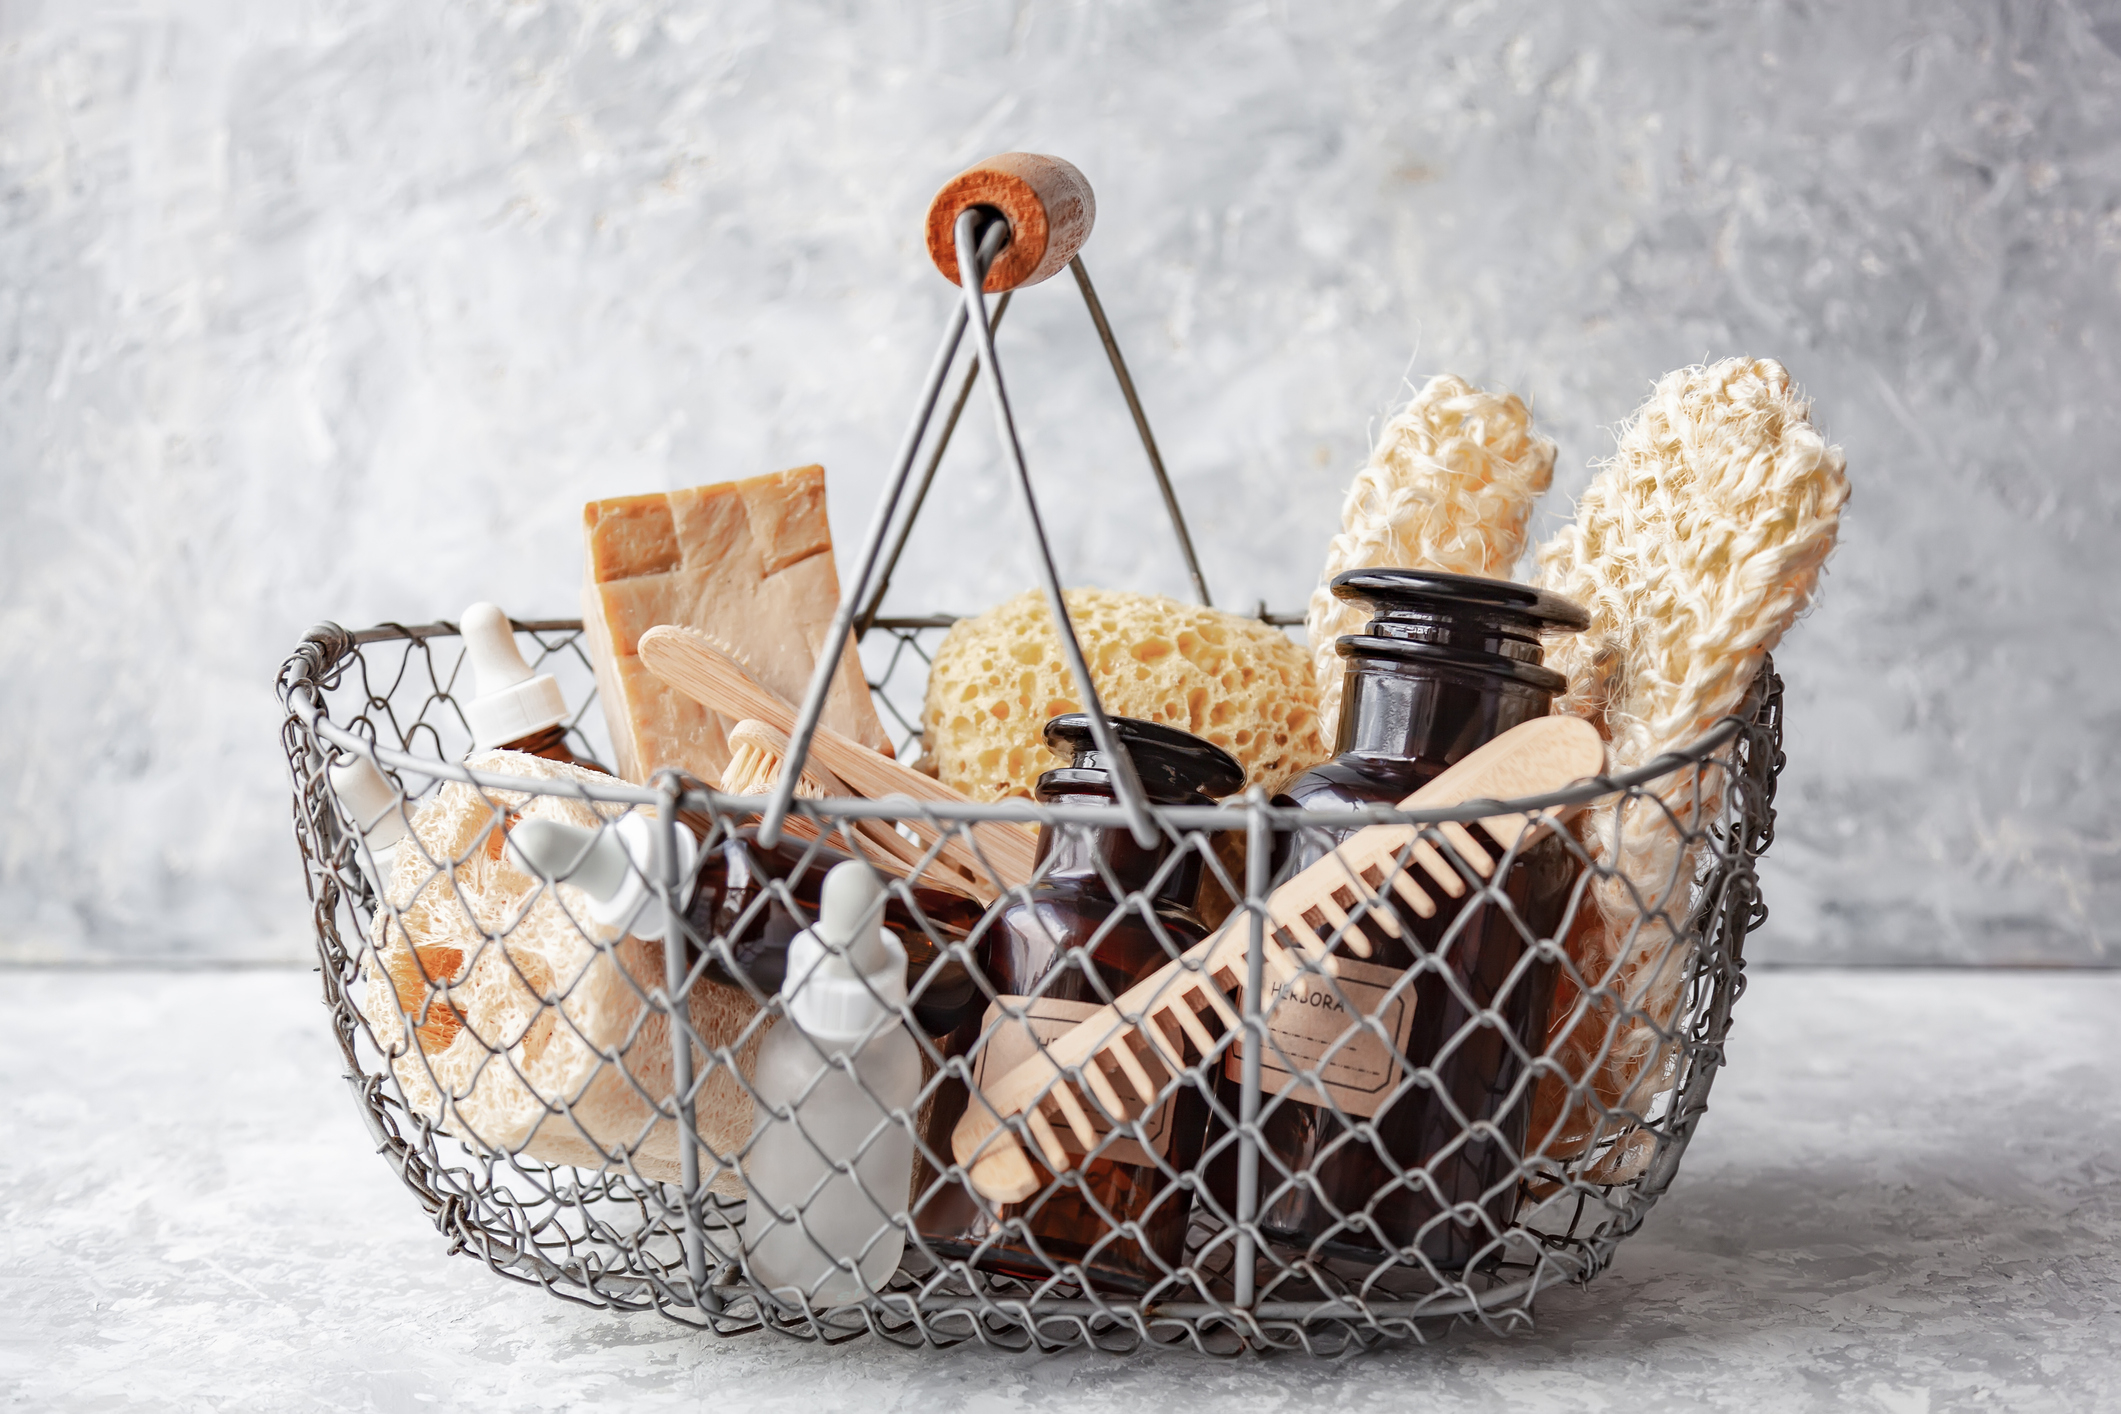 baskets of soaps bath items